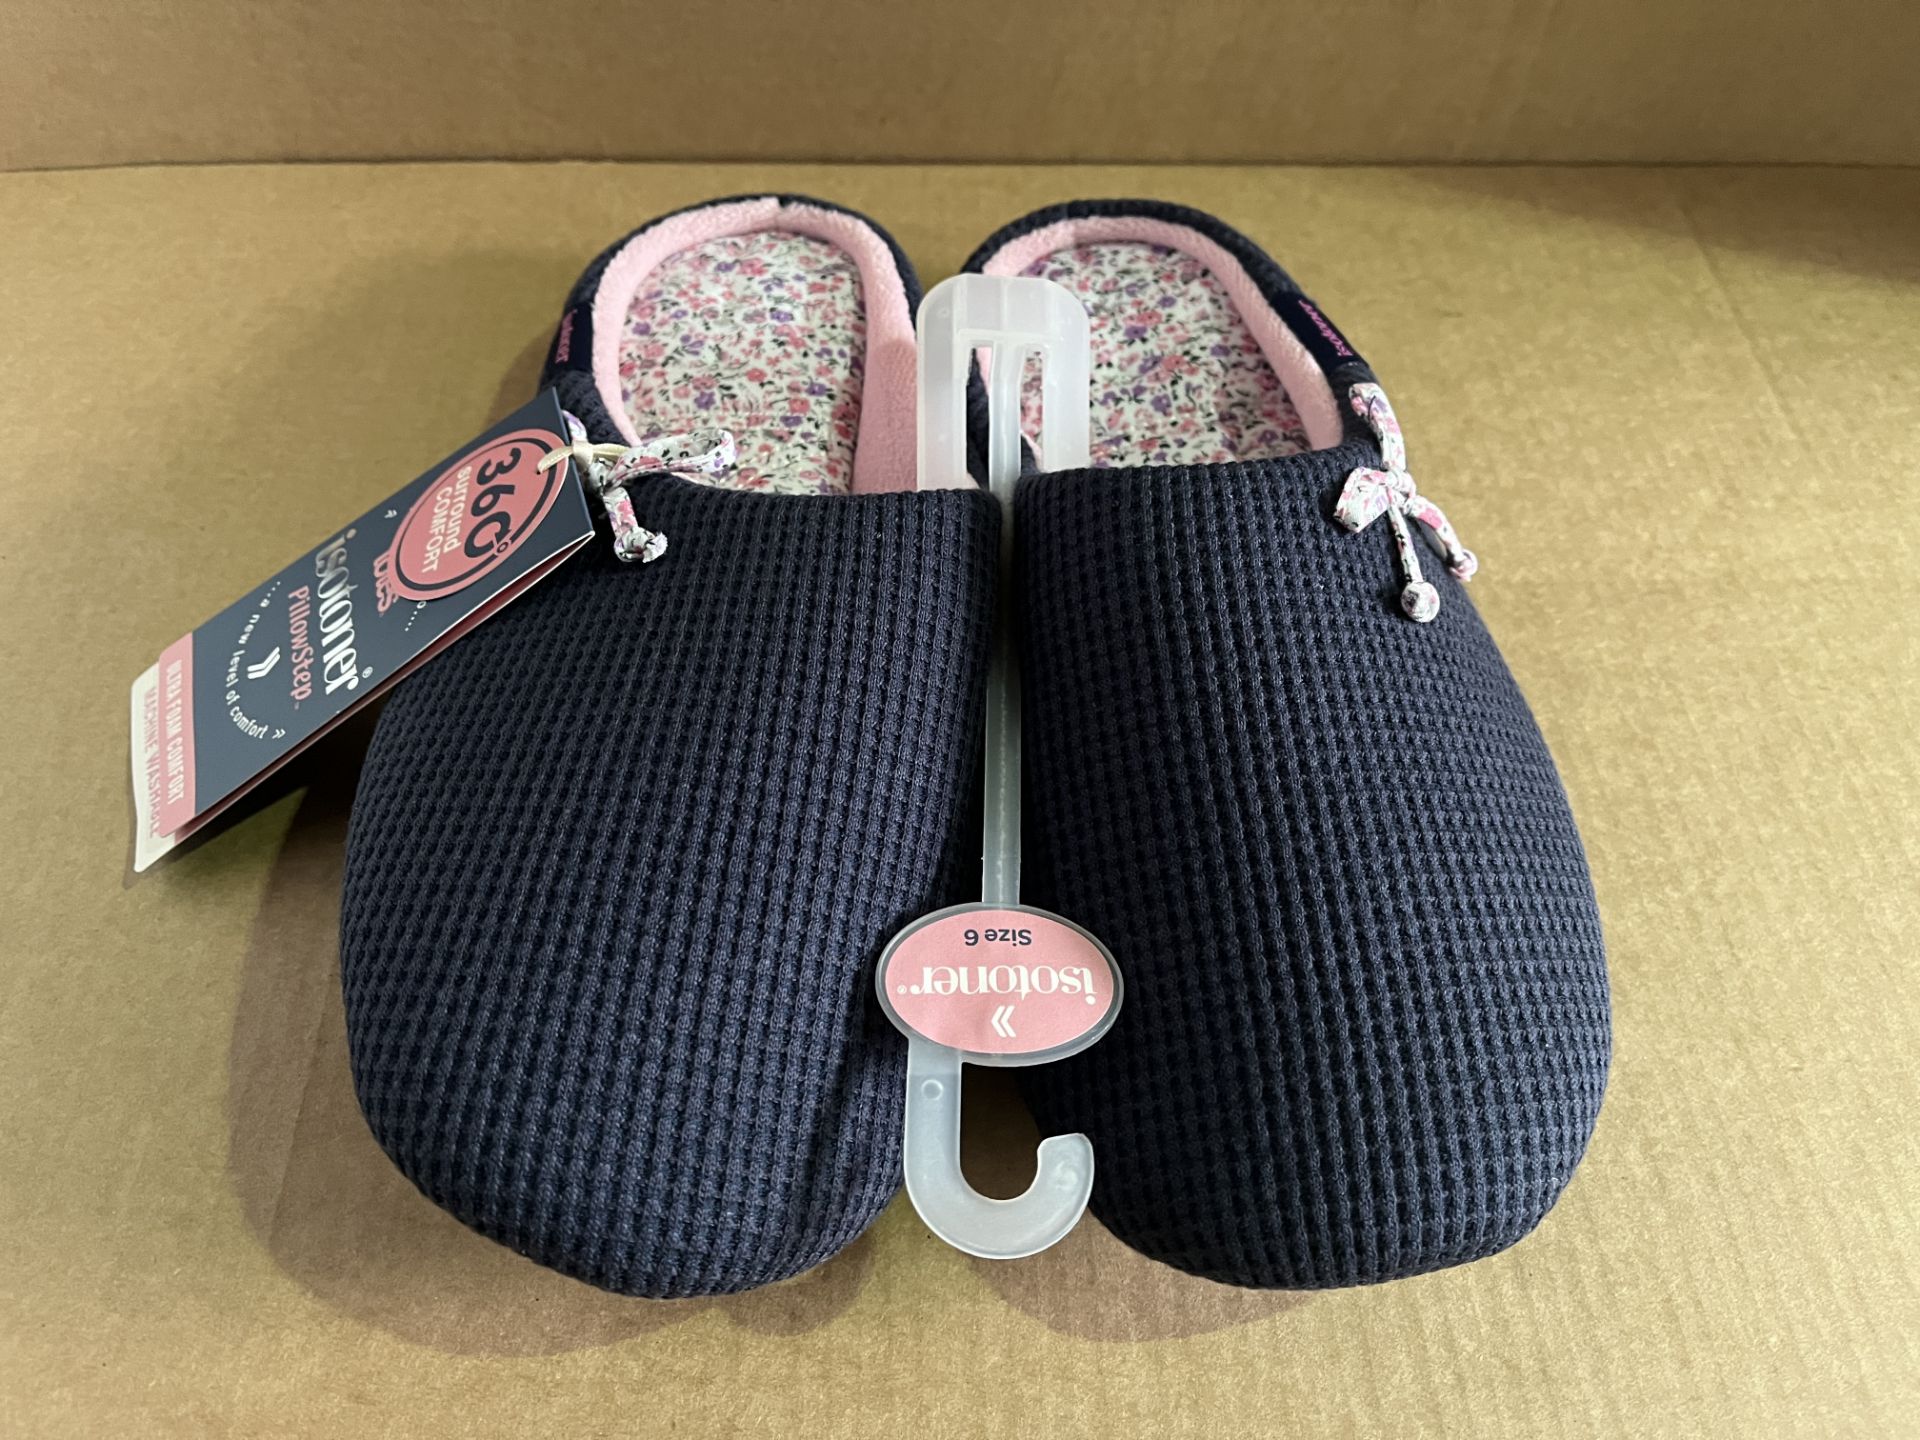 12 X BRAND NEW NAVY WAFFLE MULE TOTE ISOTONER SLIPPERS IN RATIO BOX SIZES PRICE MARKED £18 EACH 4-